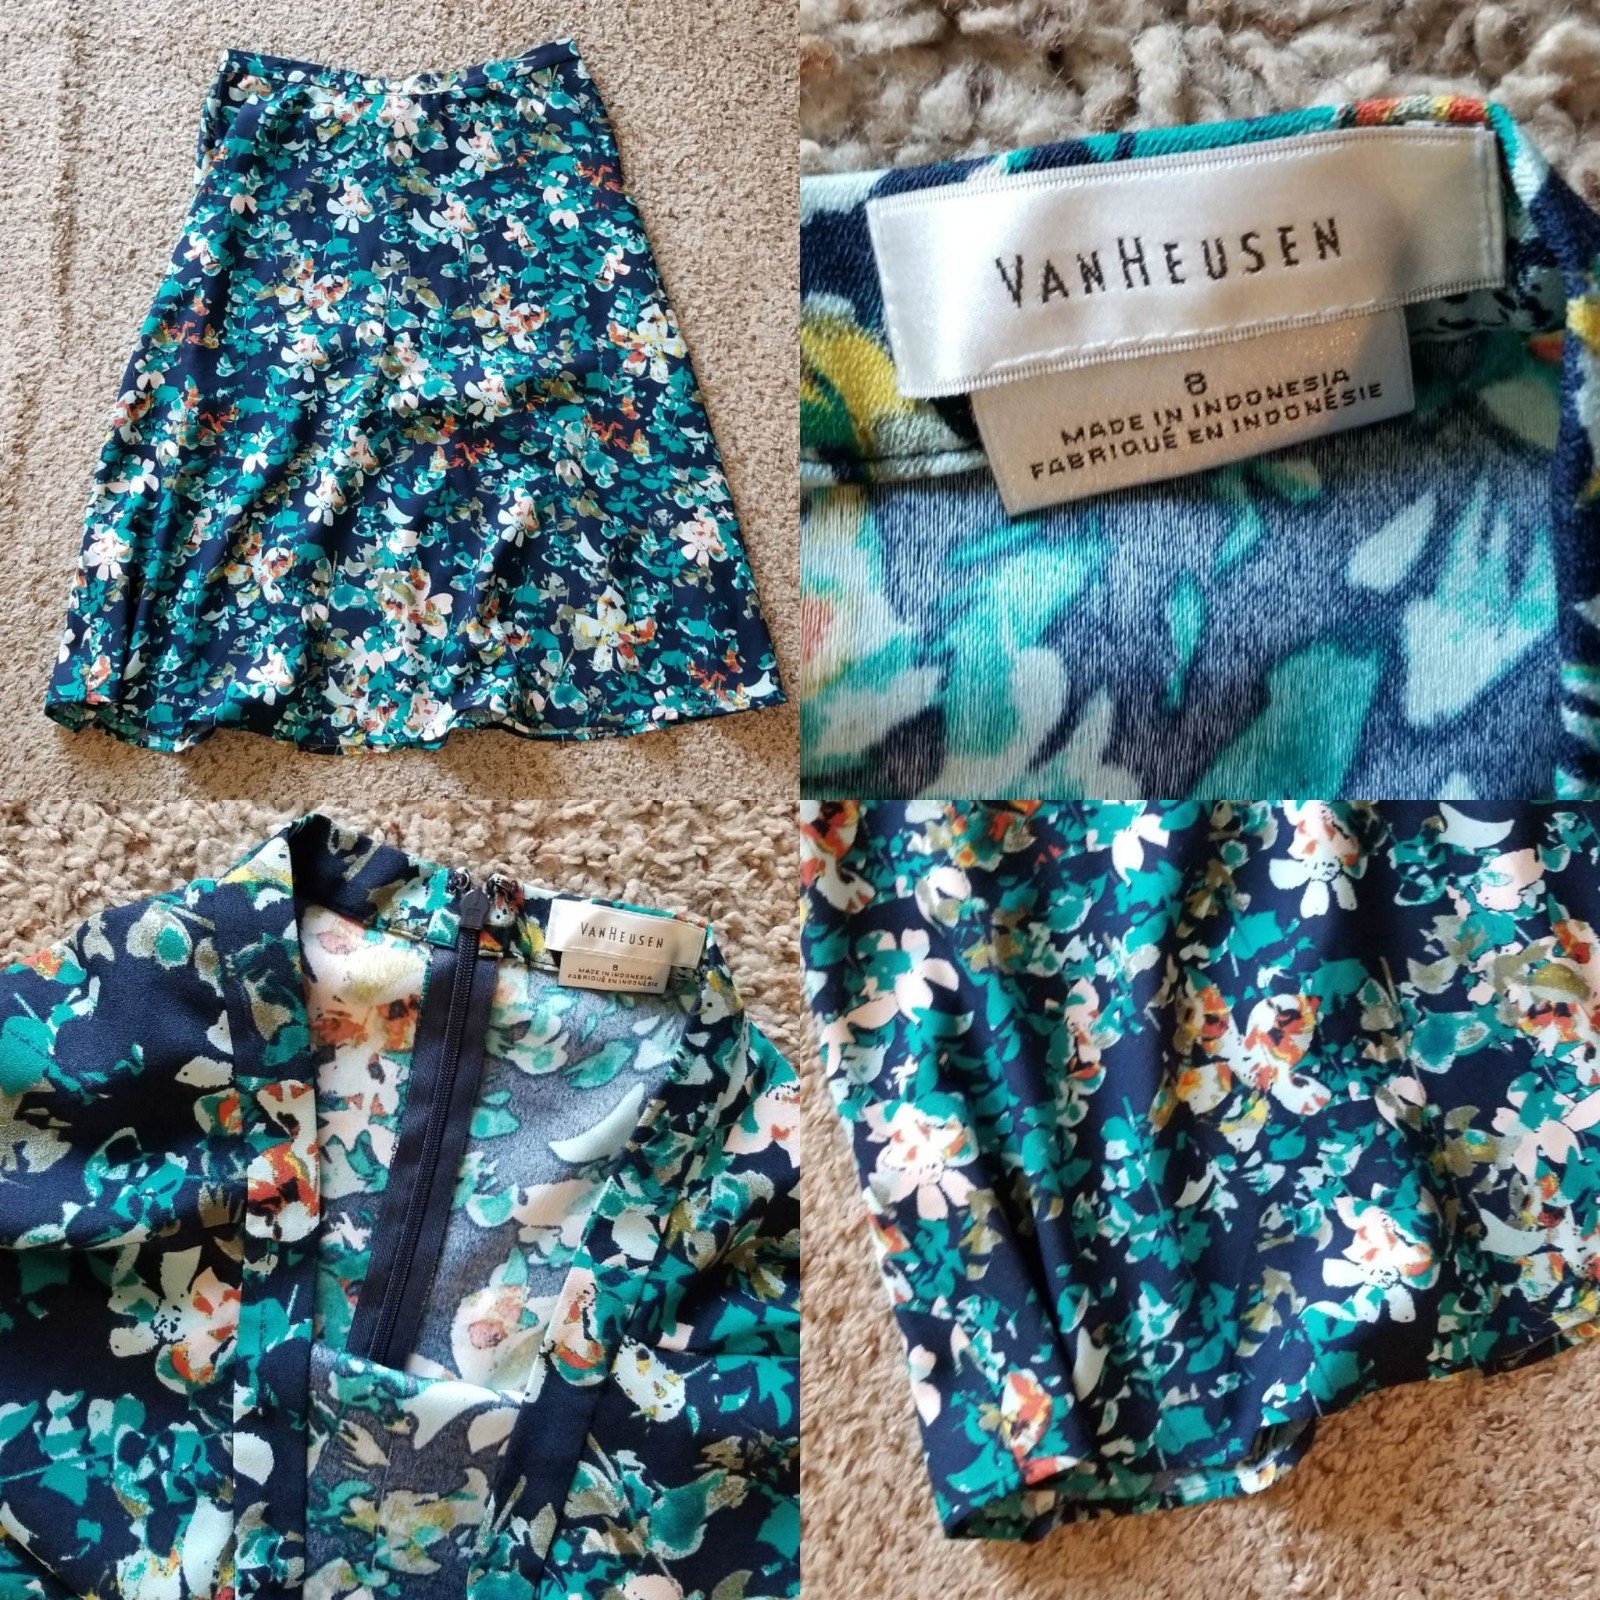 save up to 70% Van Heusen Terqouise and Navy Blue Floral Wavy Skirt 8 oCH7sB67f Great